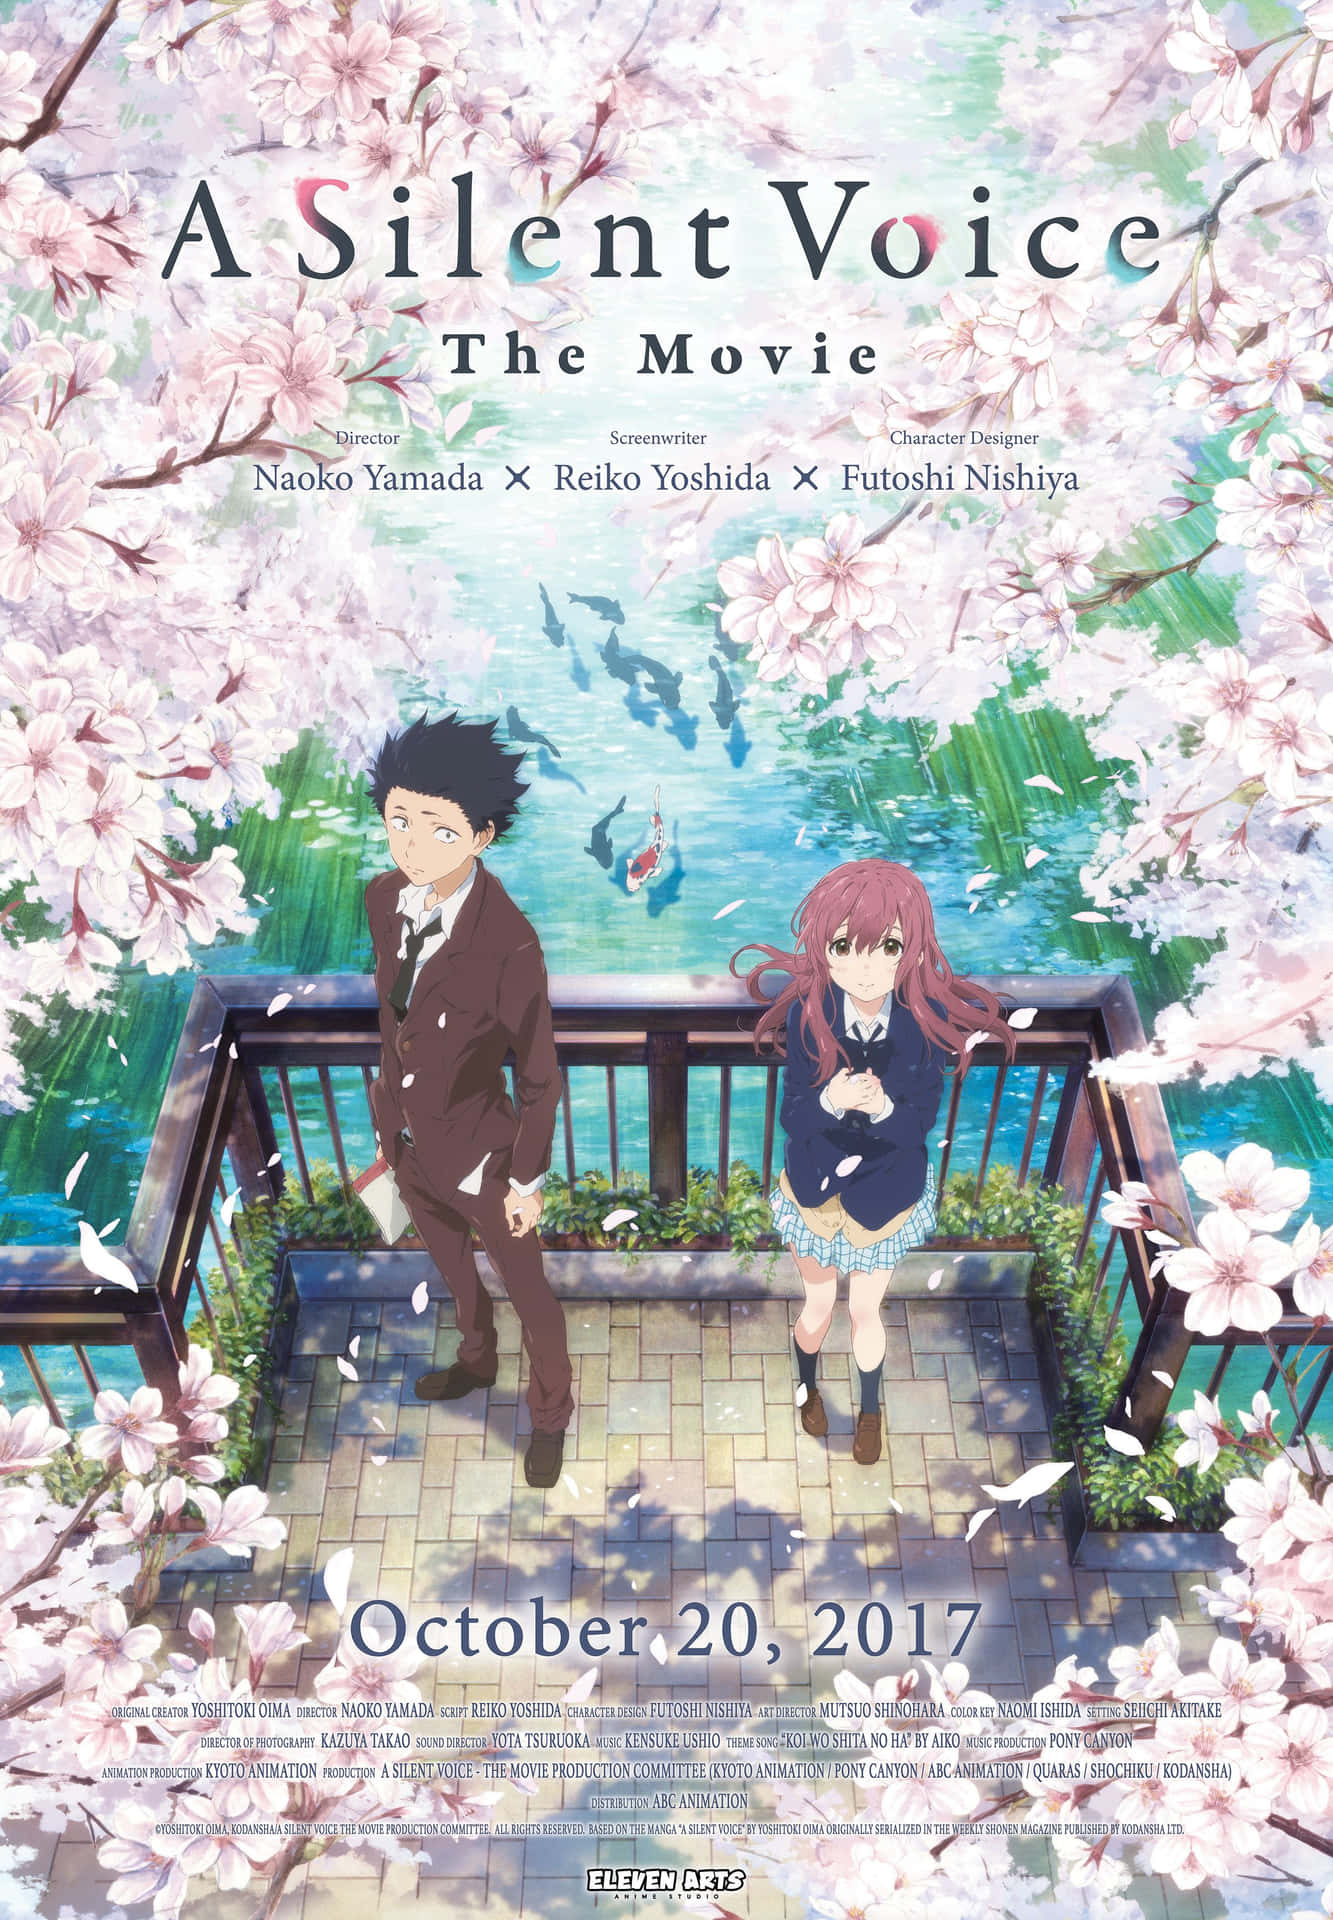 Feel inspired by A Silent Voice